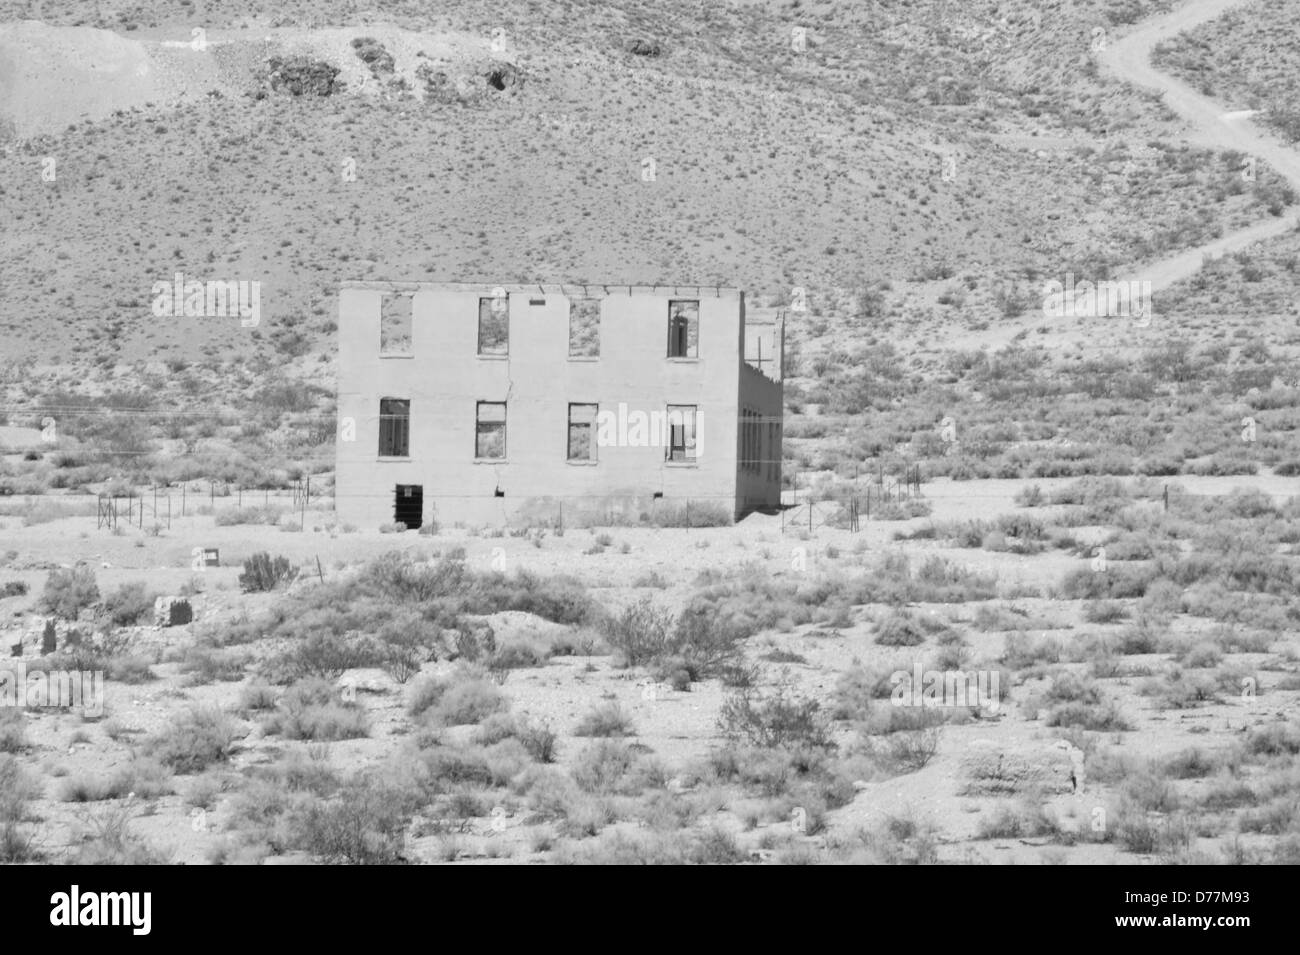 Rhyolite ghost town building. Stock Photo